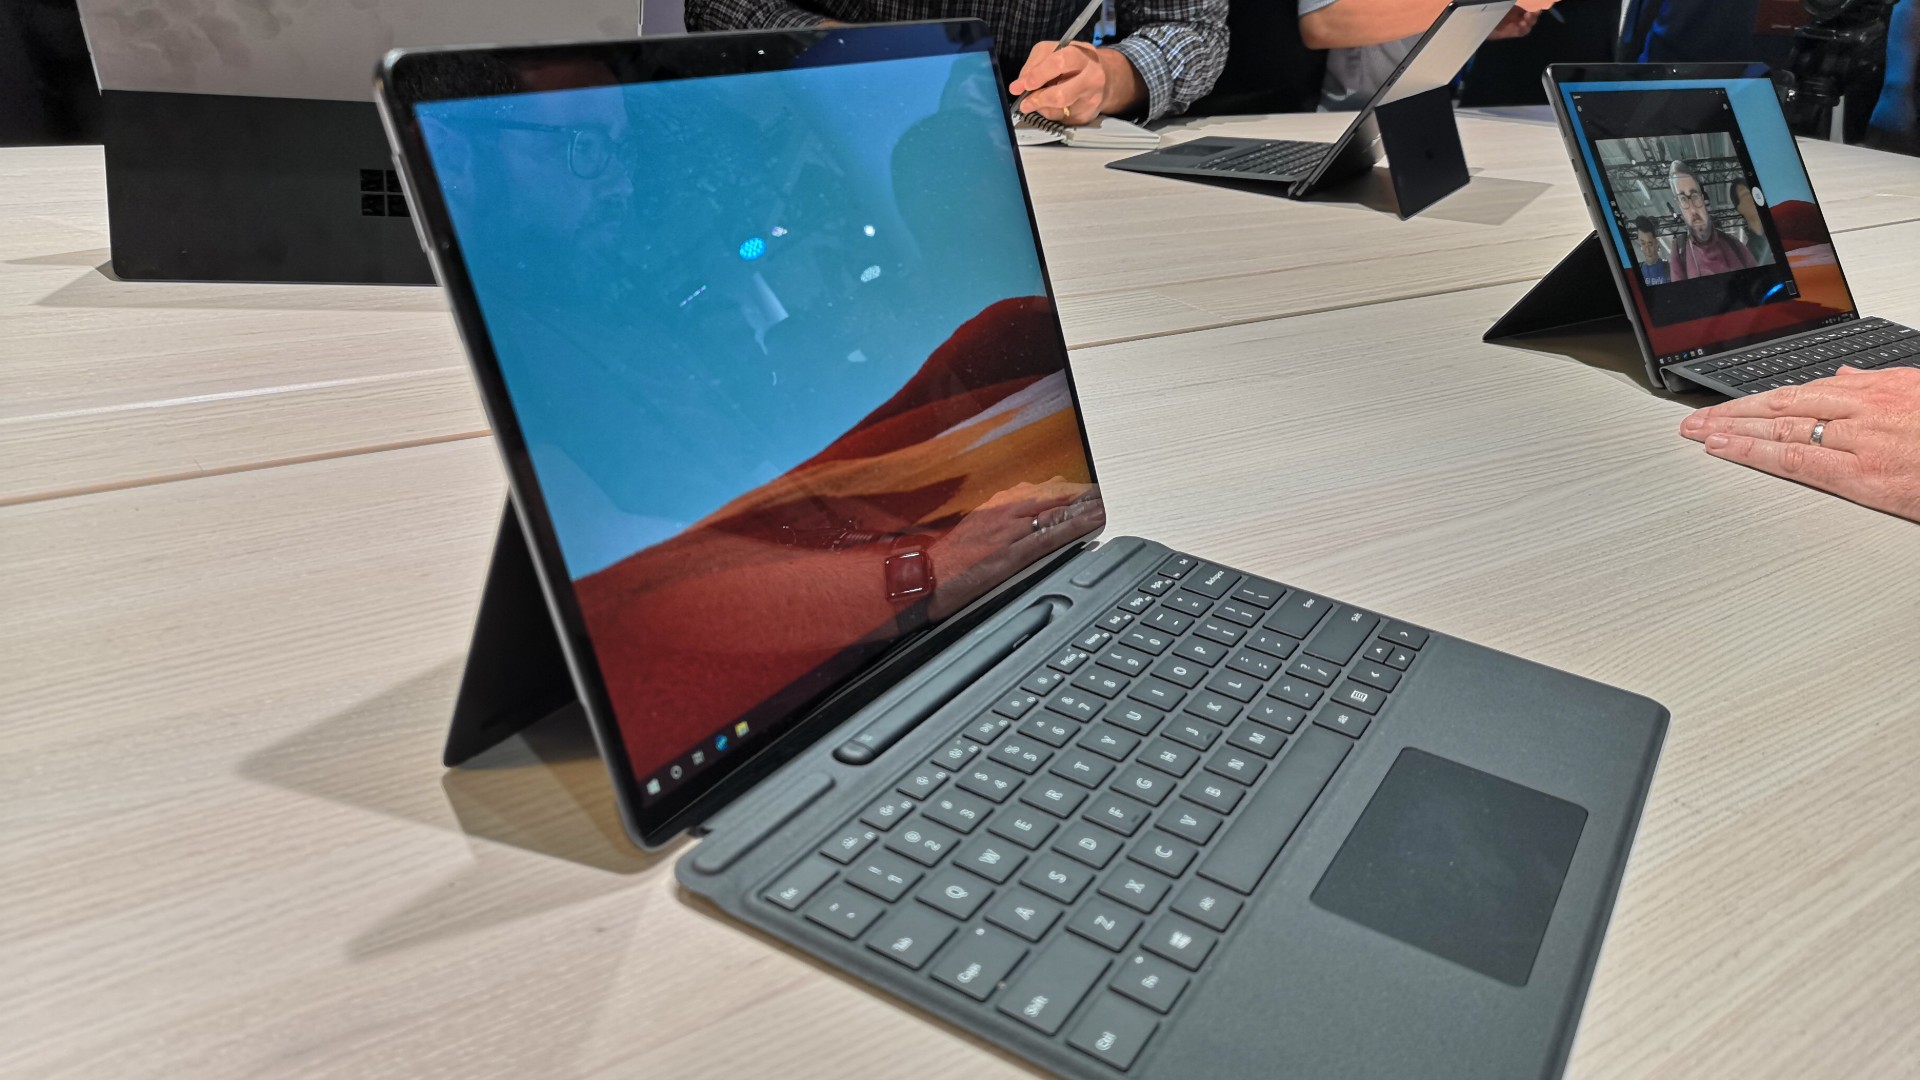 microsoft surface 8 review